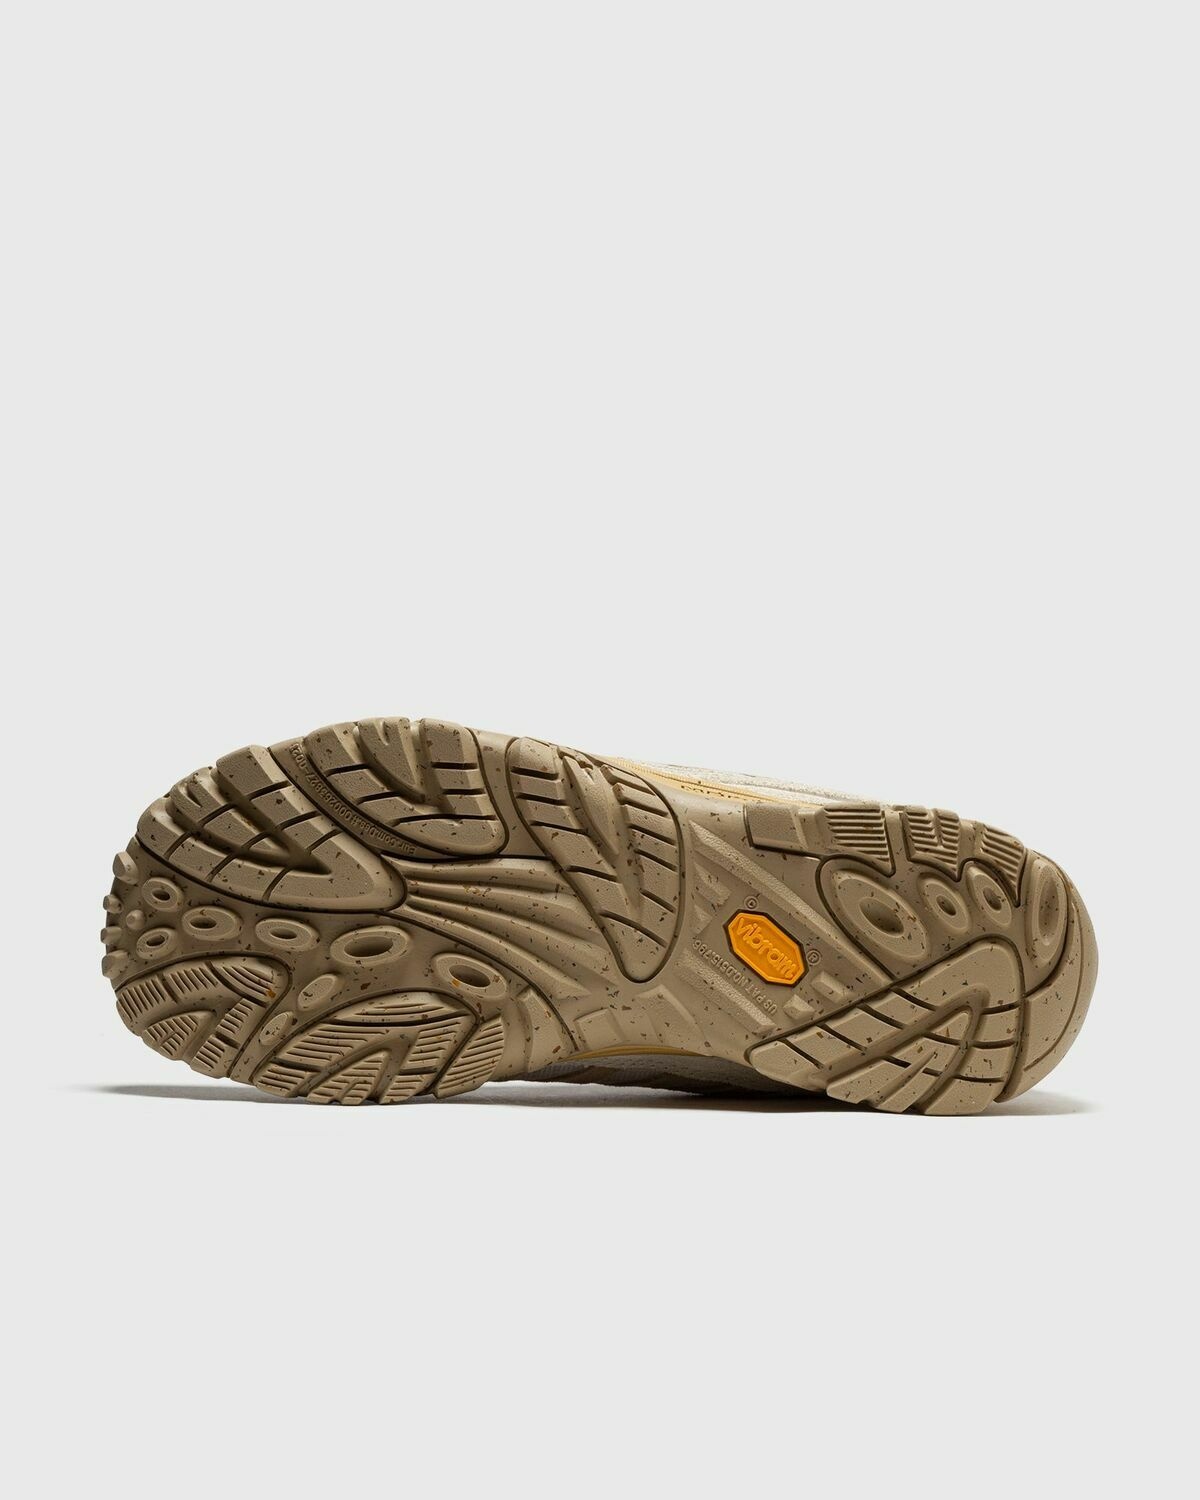 Merrell 1 Trl Moab Mesa Luxe 1 Trl Brown - Mens - Lowtop